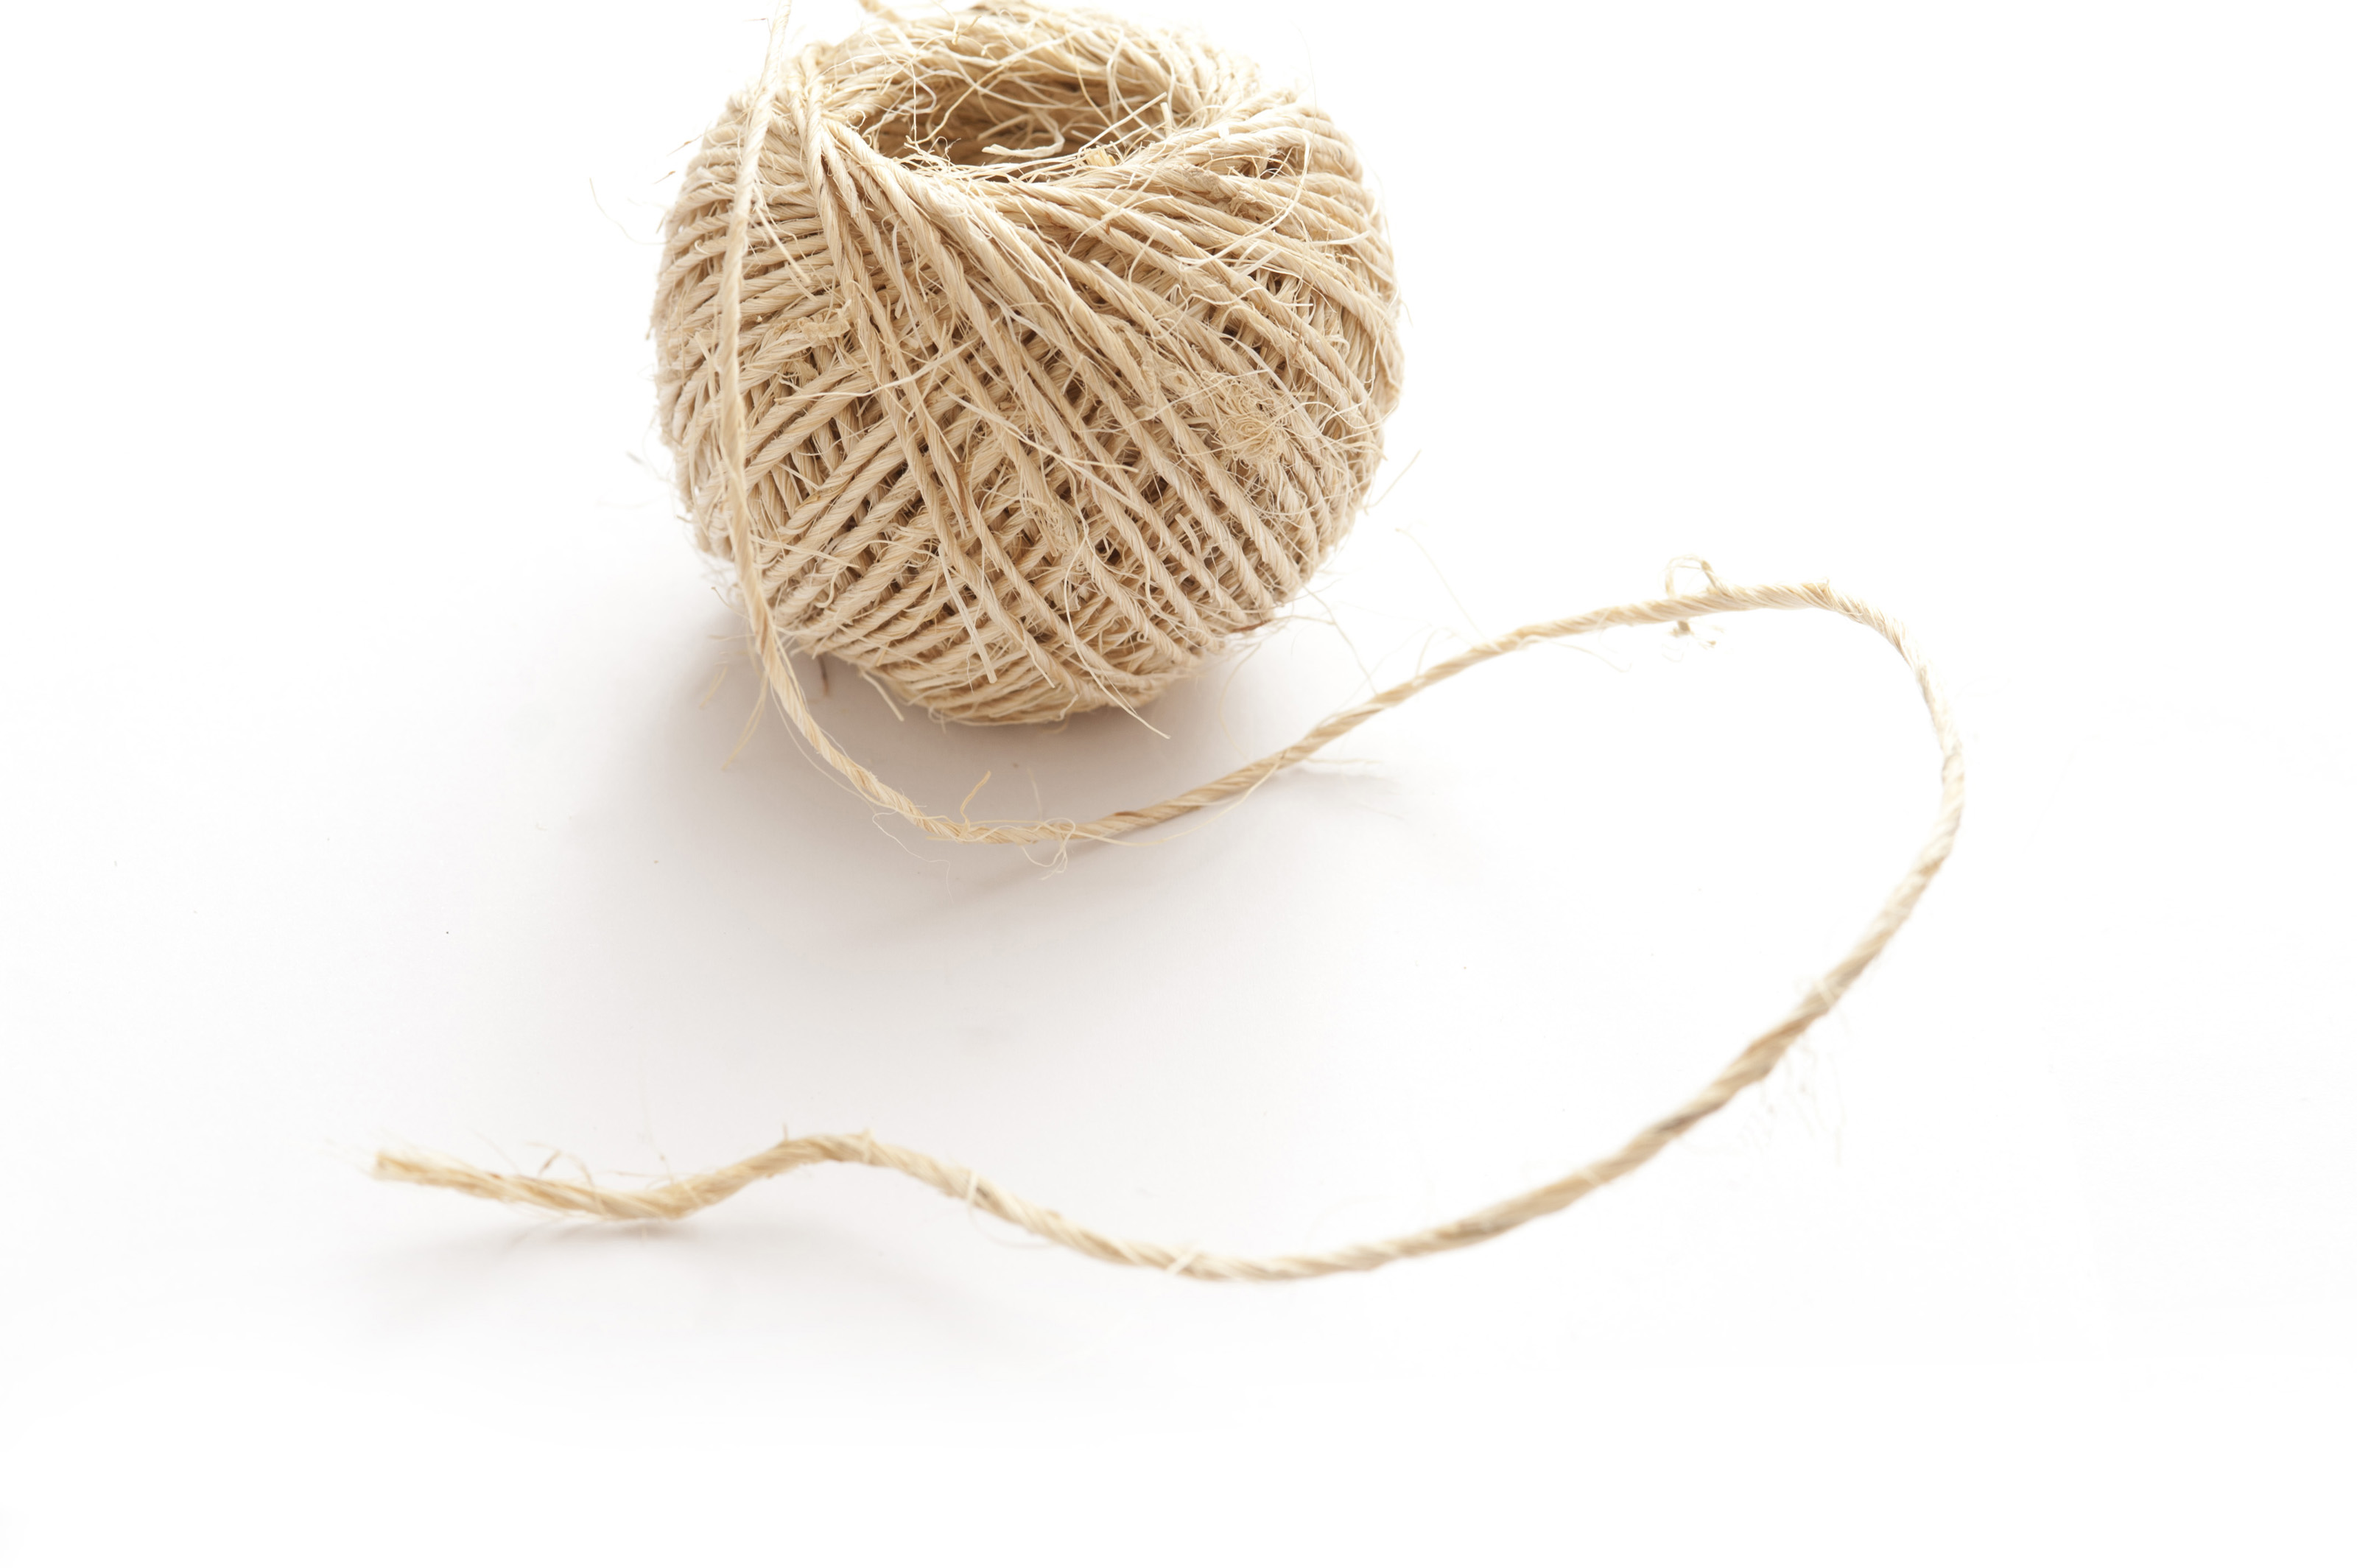 Ball Of Hemp String On White Background Stock Photo, Picture and